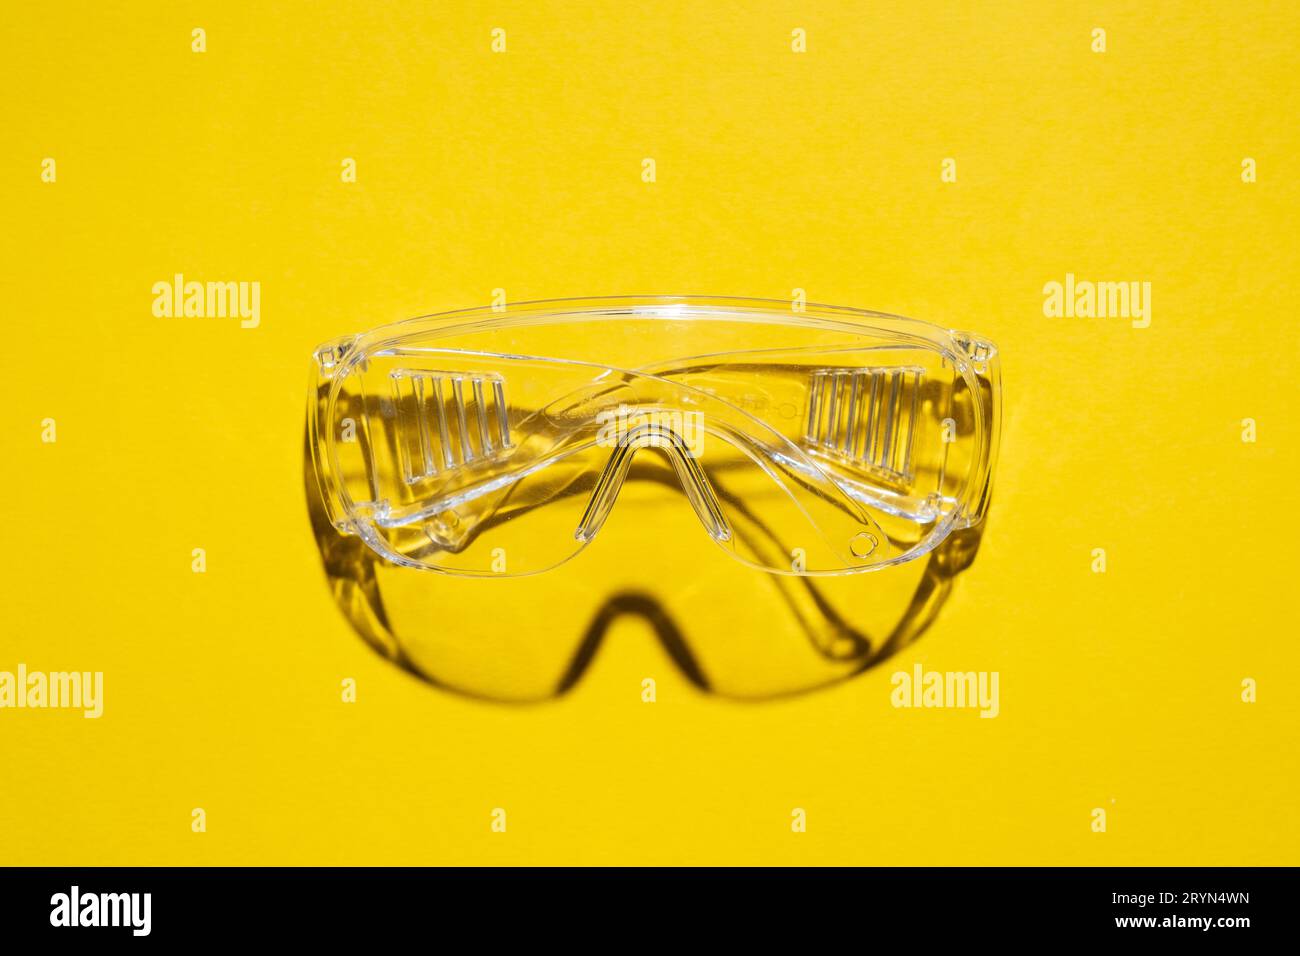 Top view of plastic safety goggles against a yellow background Stock Photo